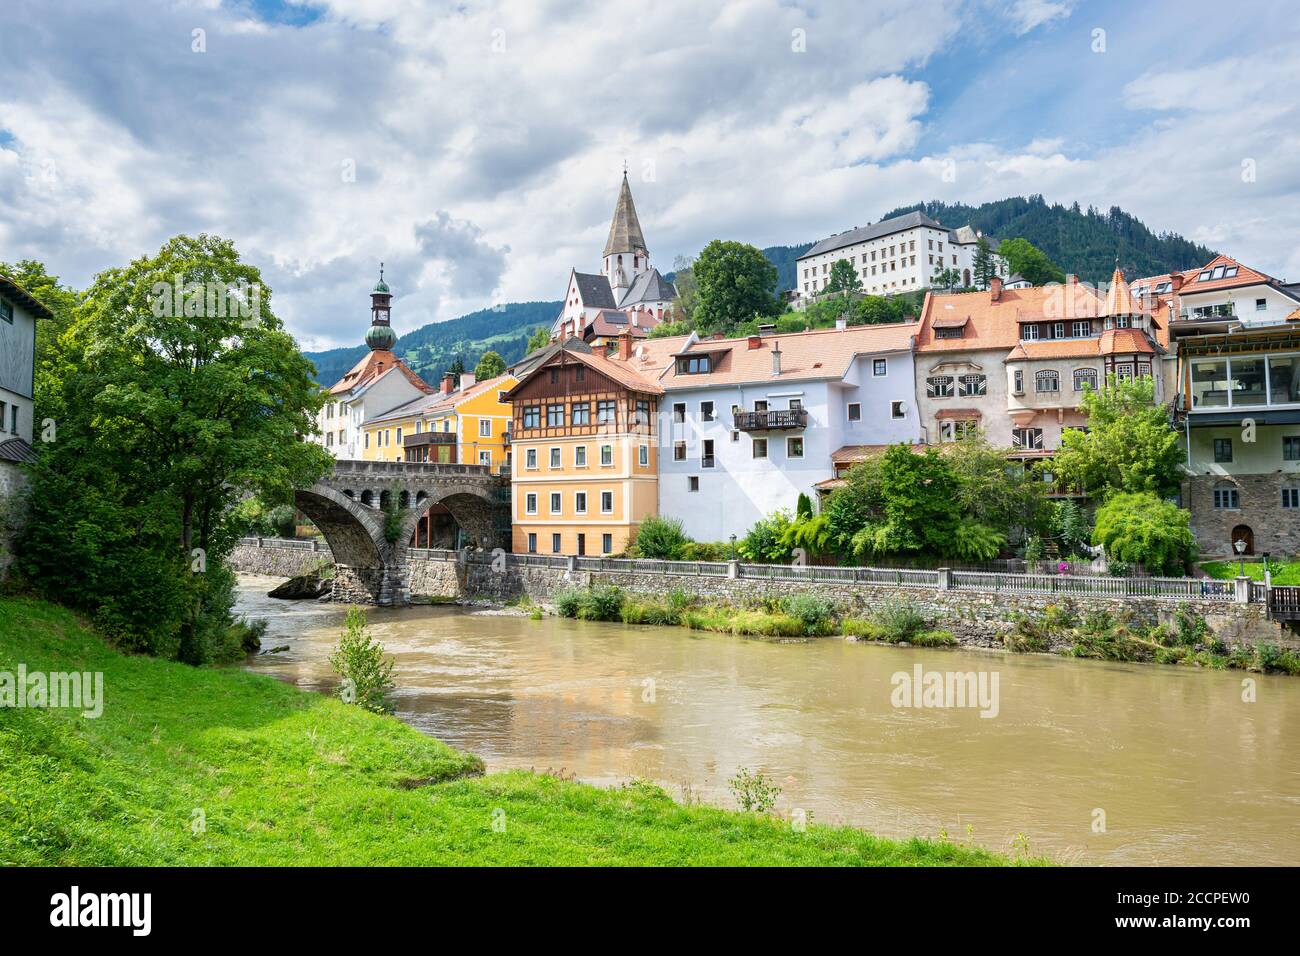 View of the town of Murau in state Steiermark, Austria. Scenic arch bridge over river Mur. Stock Photo